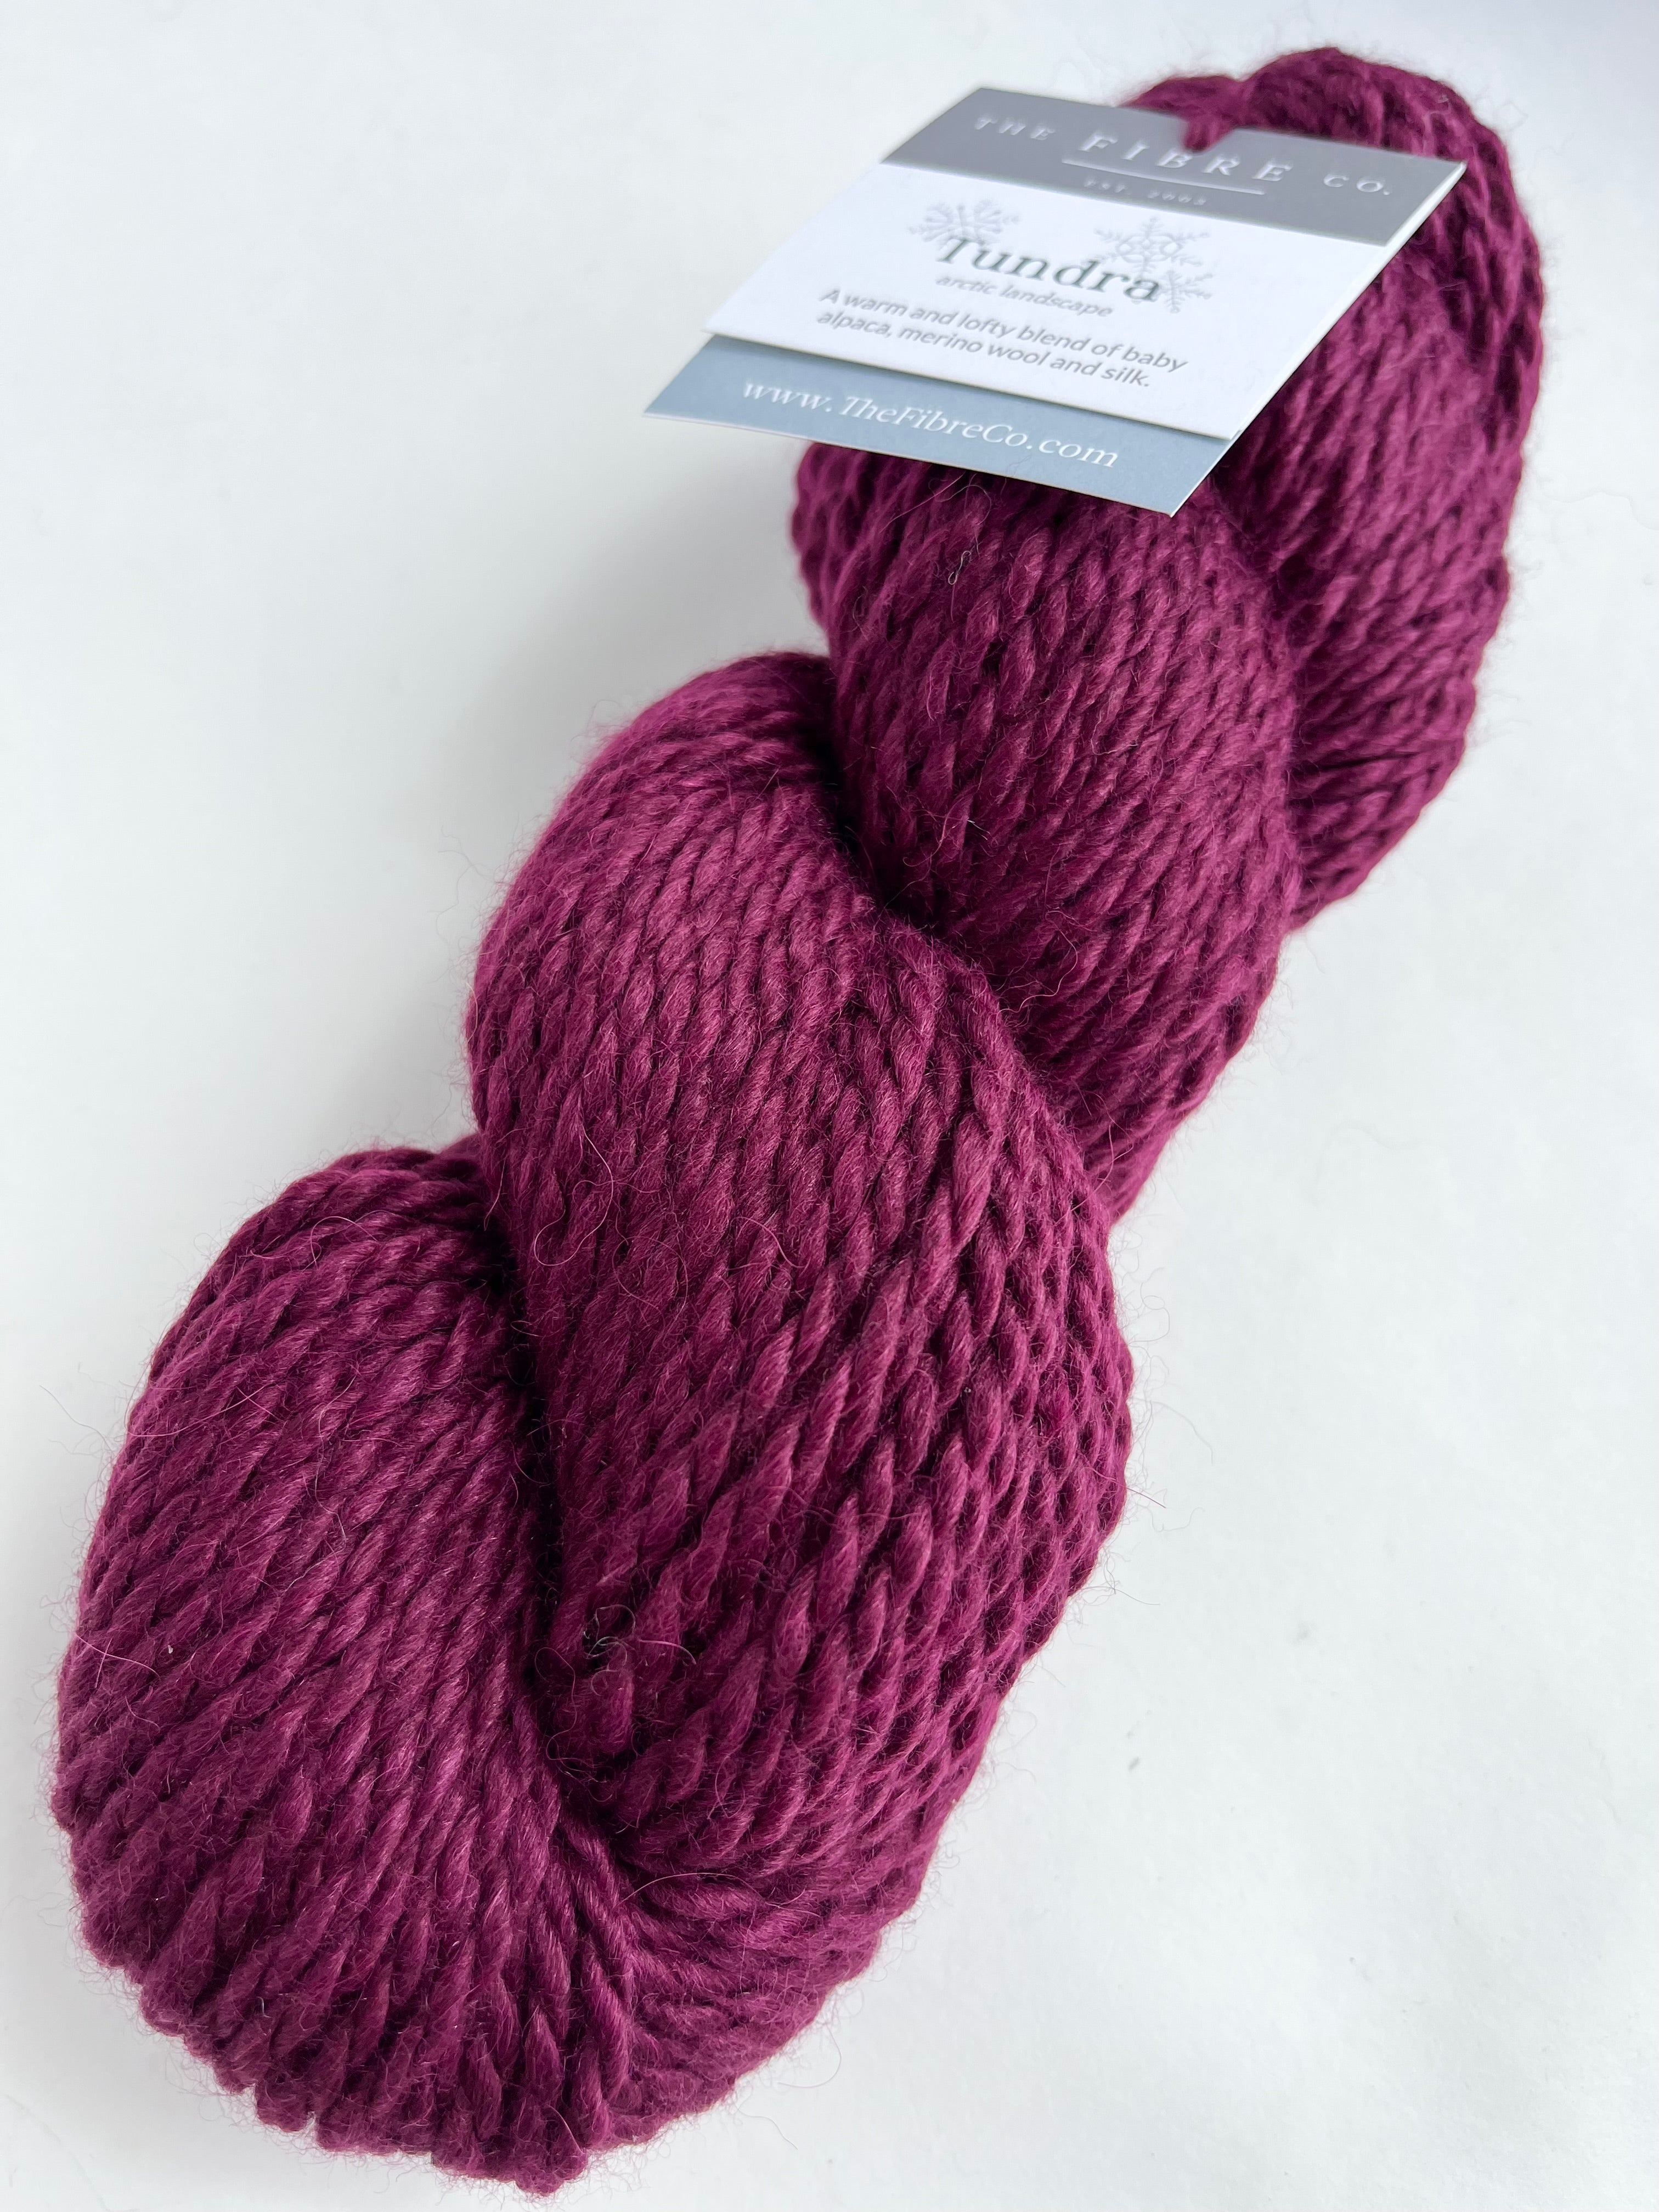 Lingonberry - Tundra from the Fibre Co.